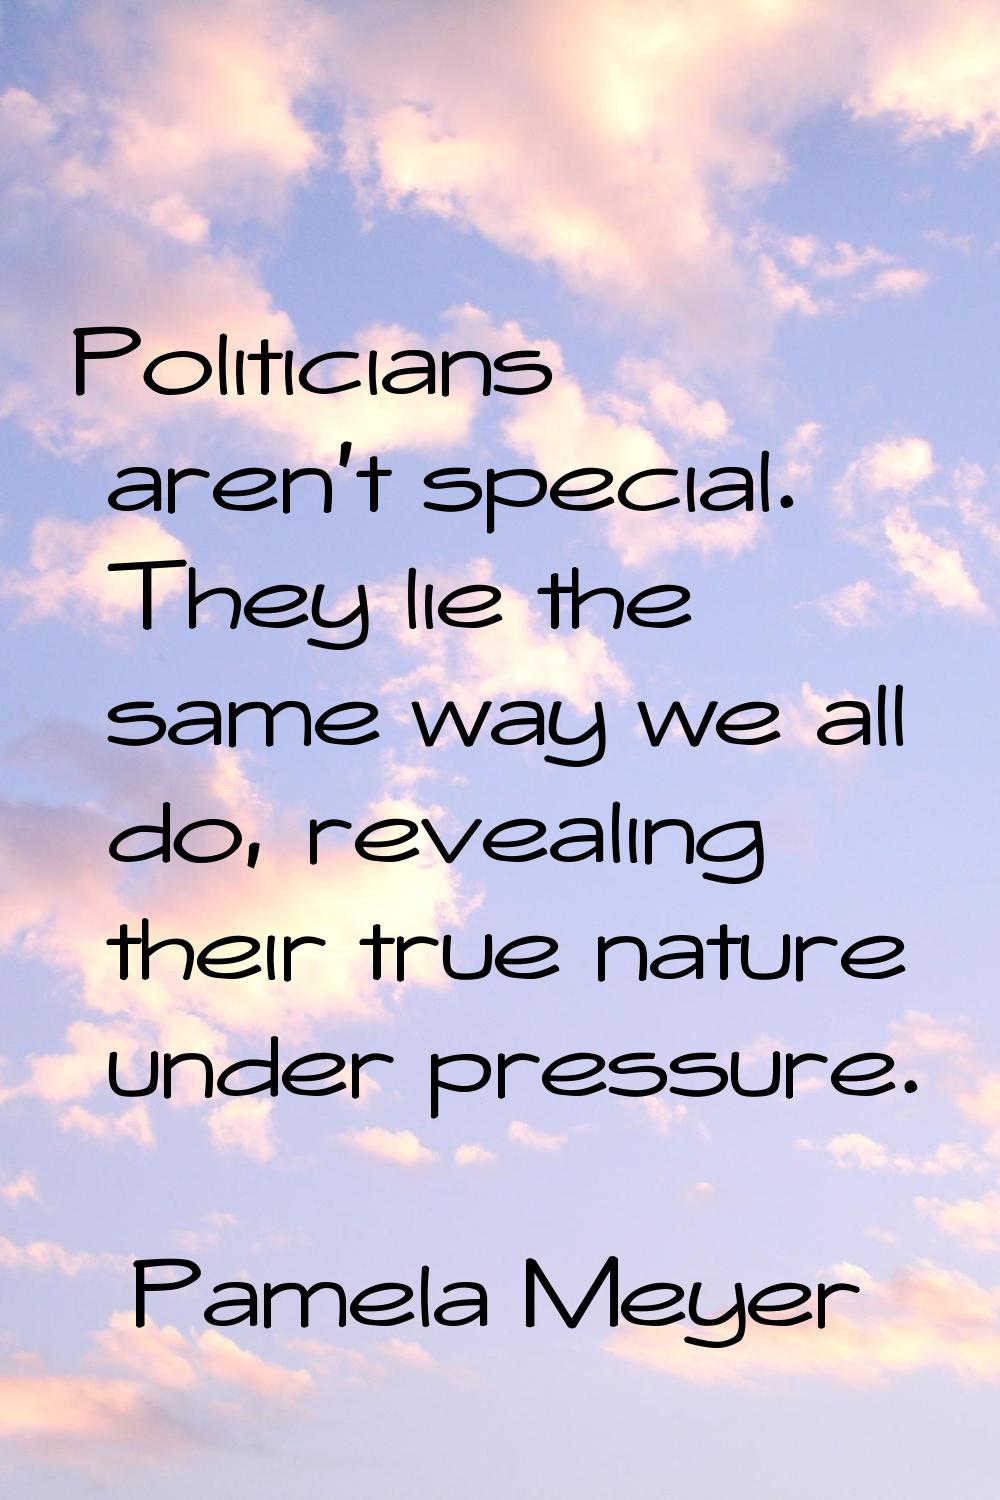 Politicians aren't special. They lie the same way we all do, revealing their true nature under pres